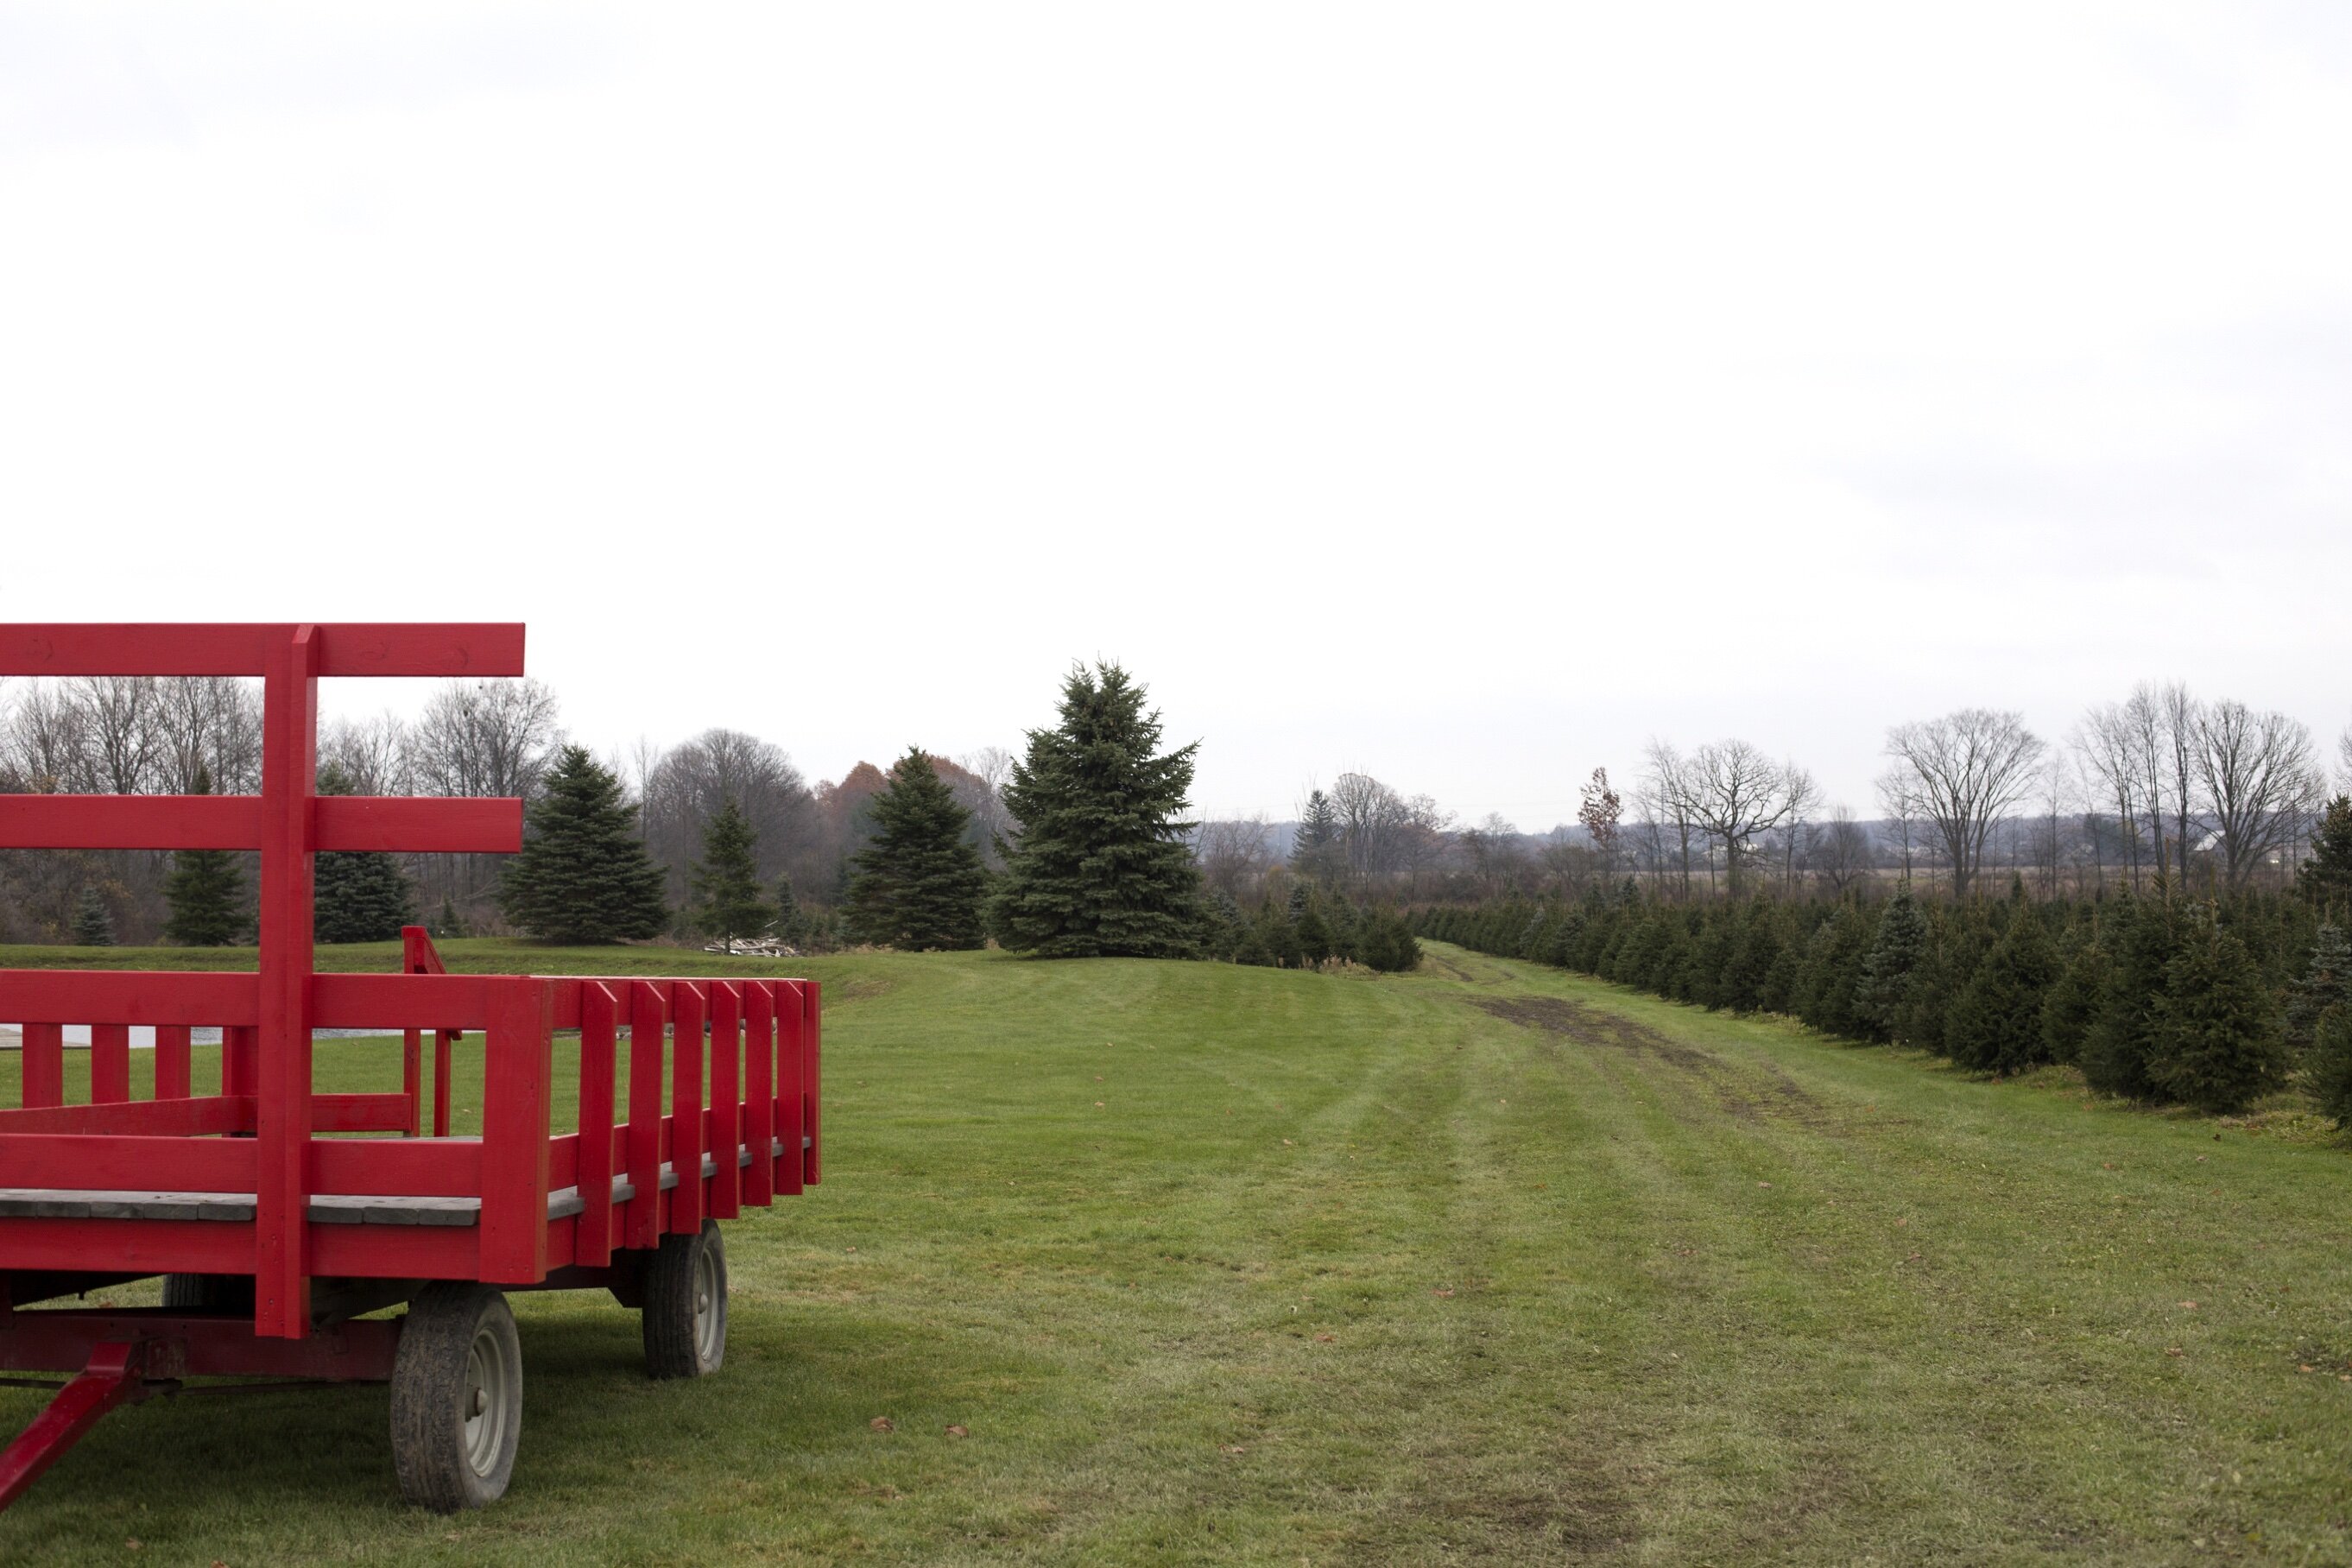 Of the 20-acre property owned by Ed and Theresa Shephard, roughly 15 acres is dedicated to the tree farm. Once customers remove a tree from the field, the red wagon is used to transport the trees back to the front of the property.